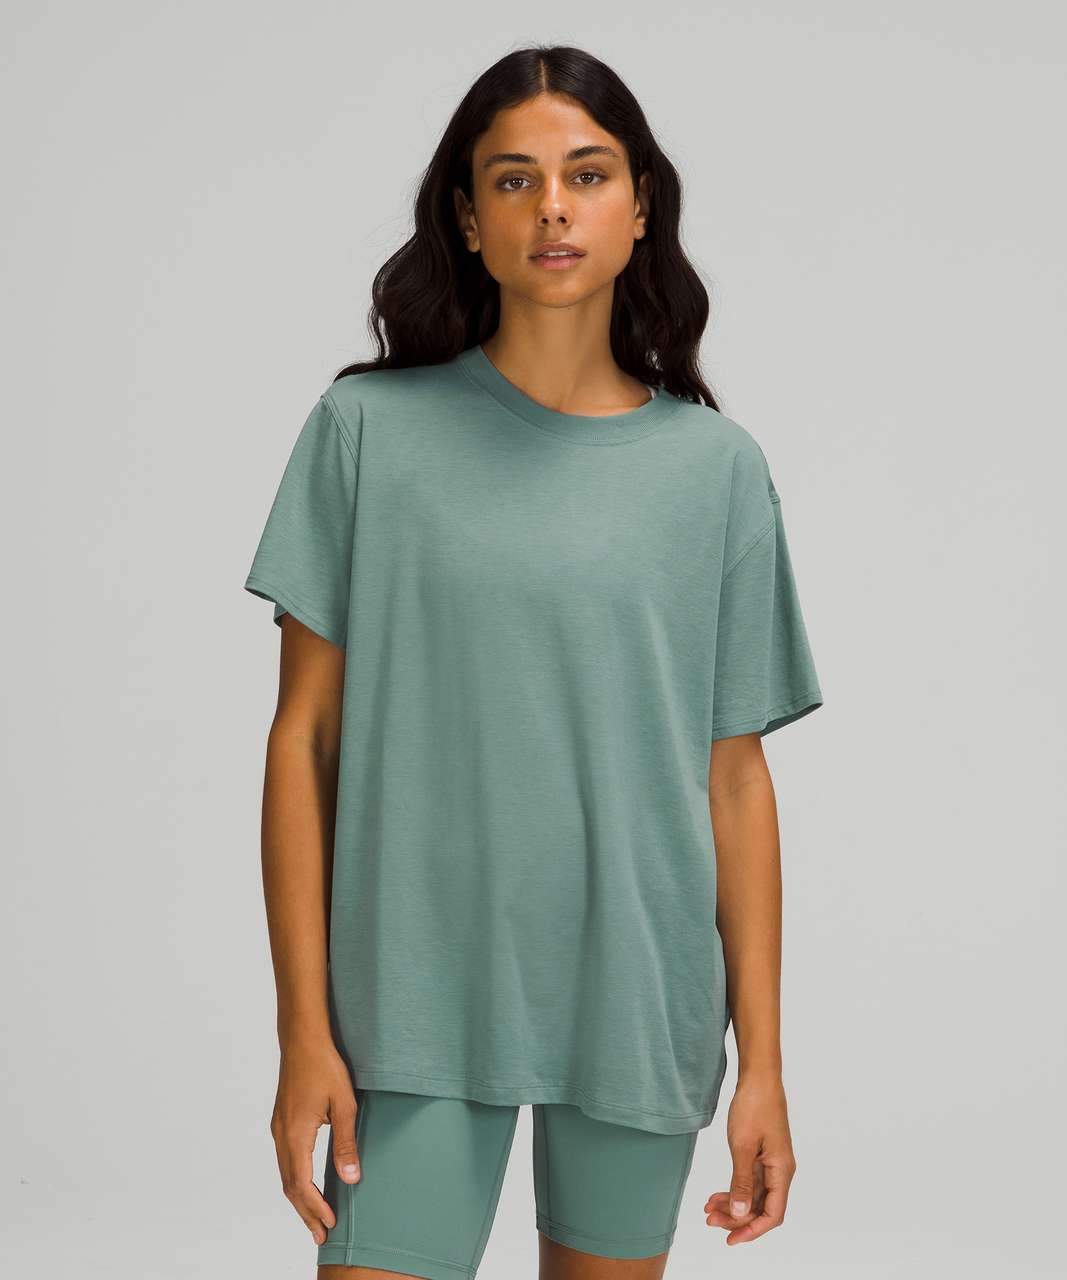 Lululemon All Yours Tee - Tidewater Teal